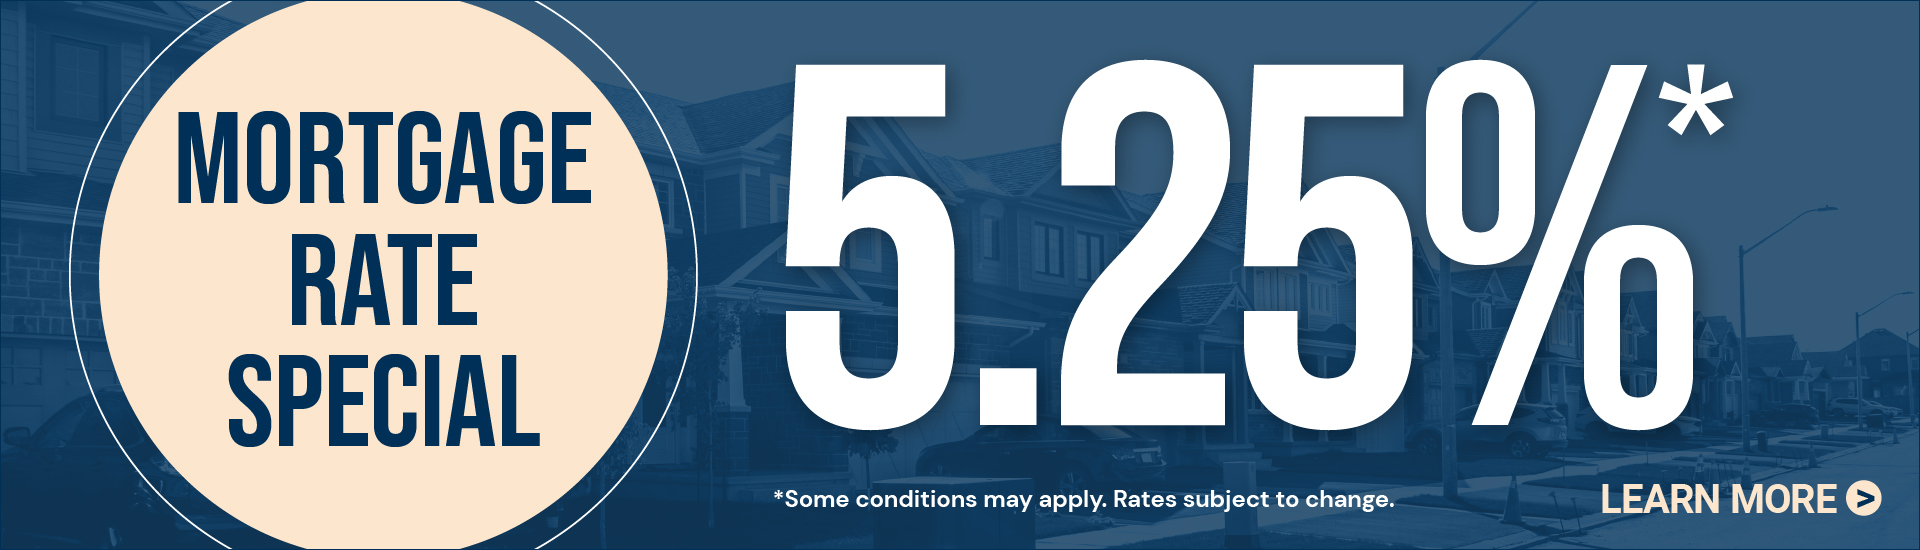 Mortgage Rate Special 5.25%